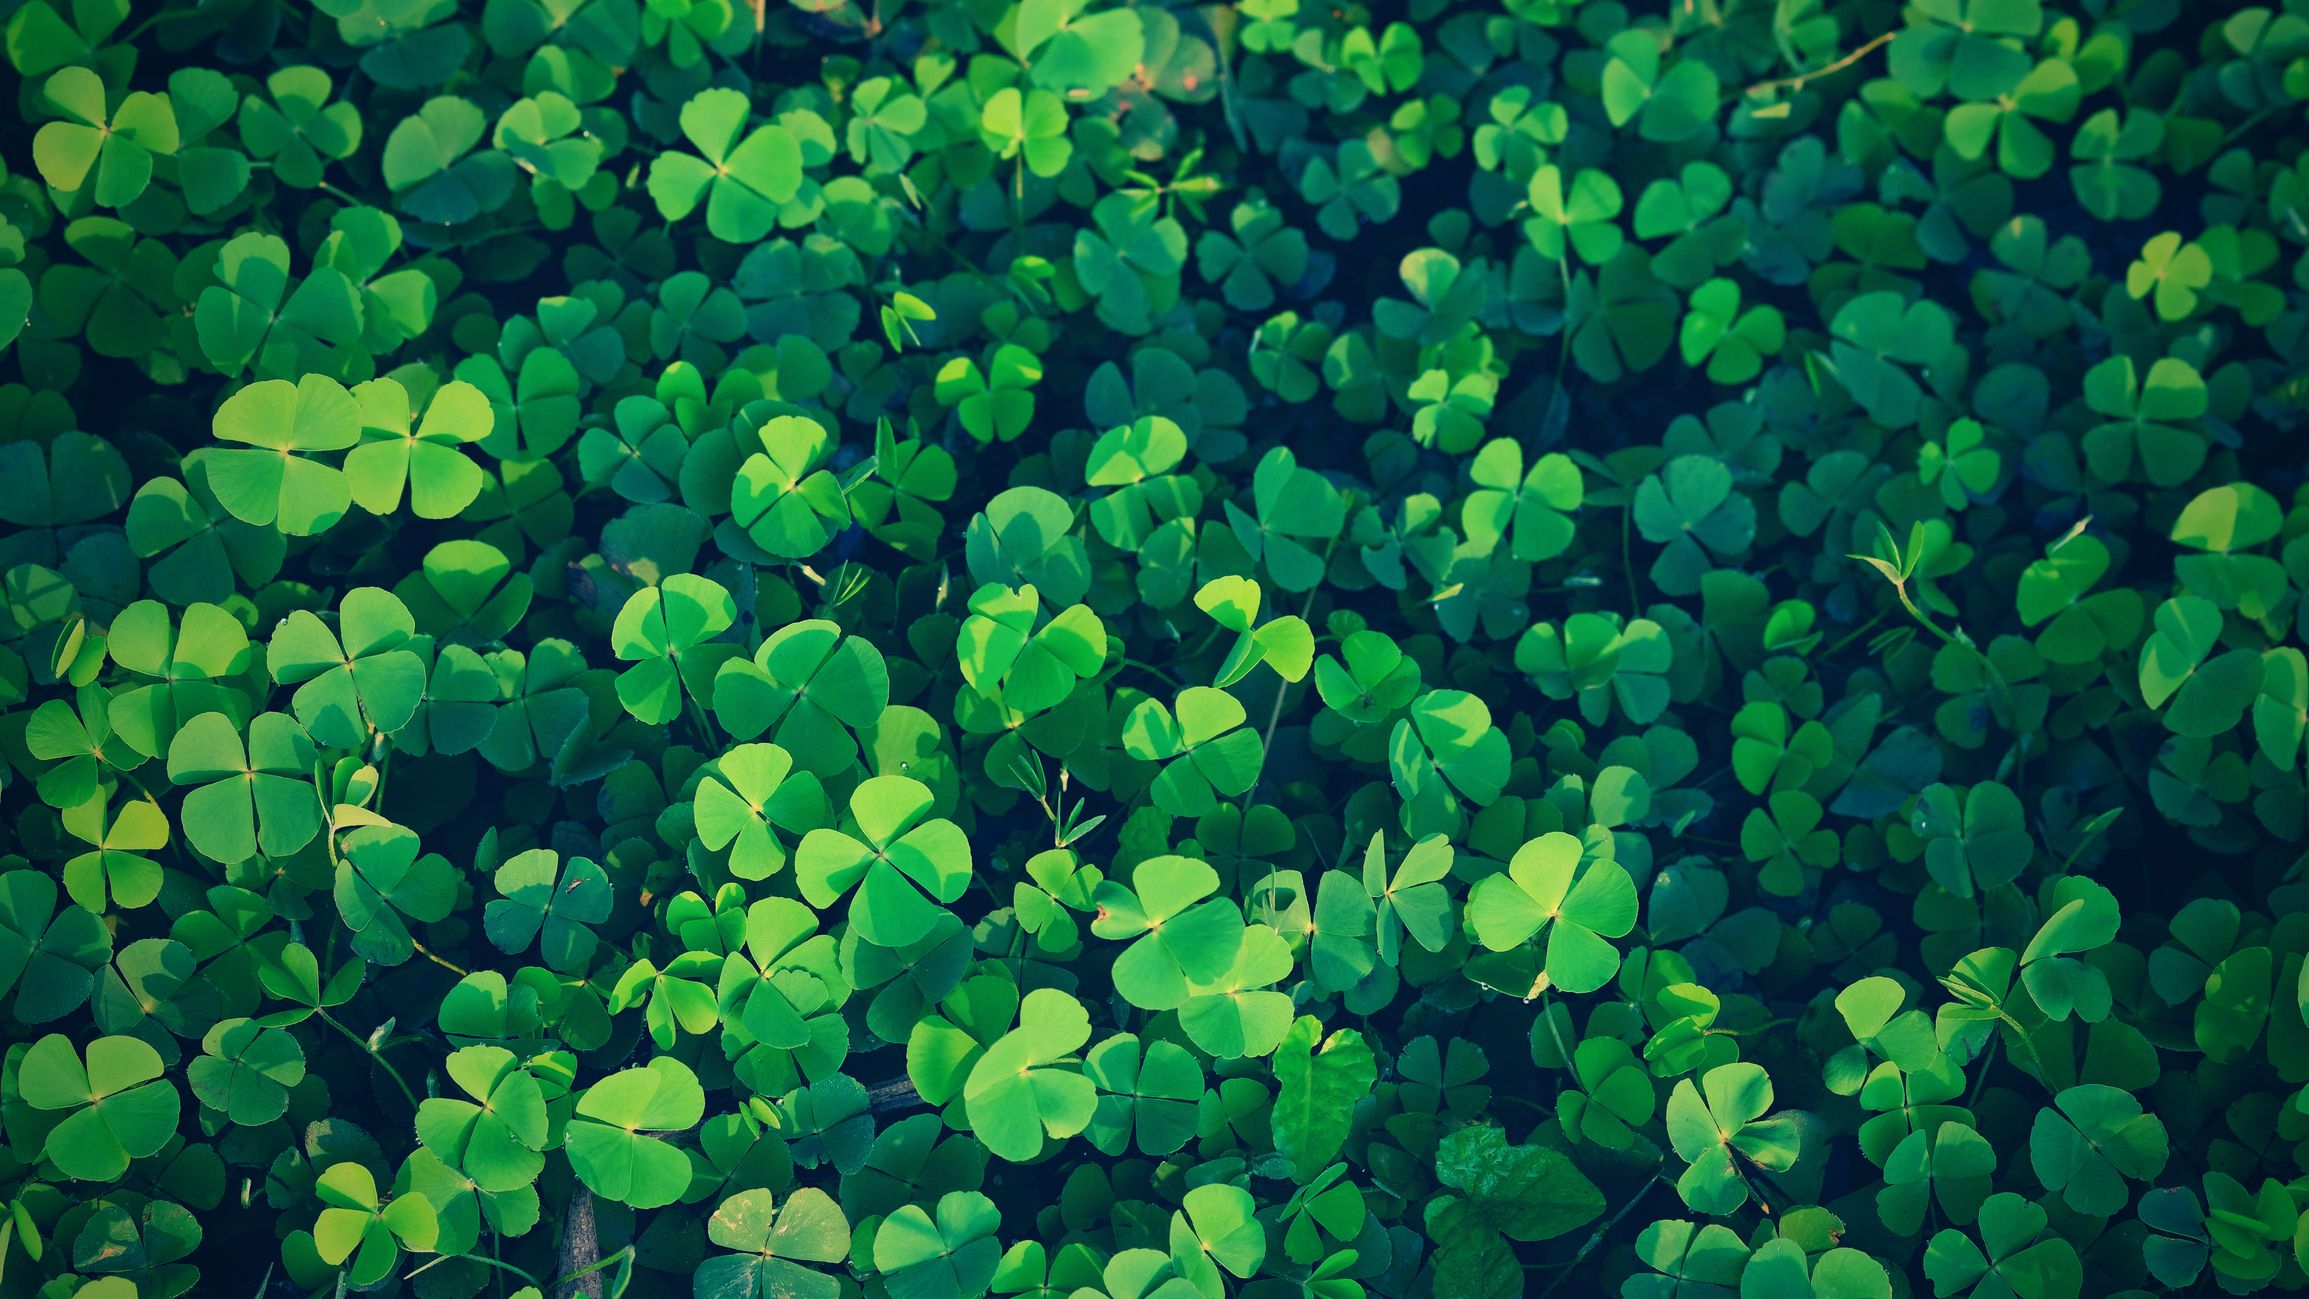 St day blessing patricks for irish 17 Quotes